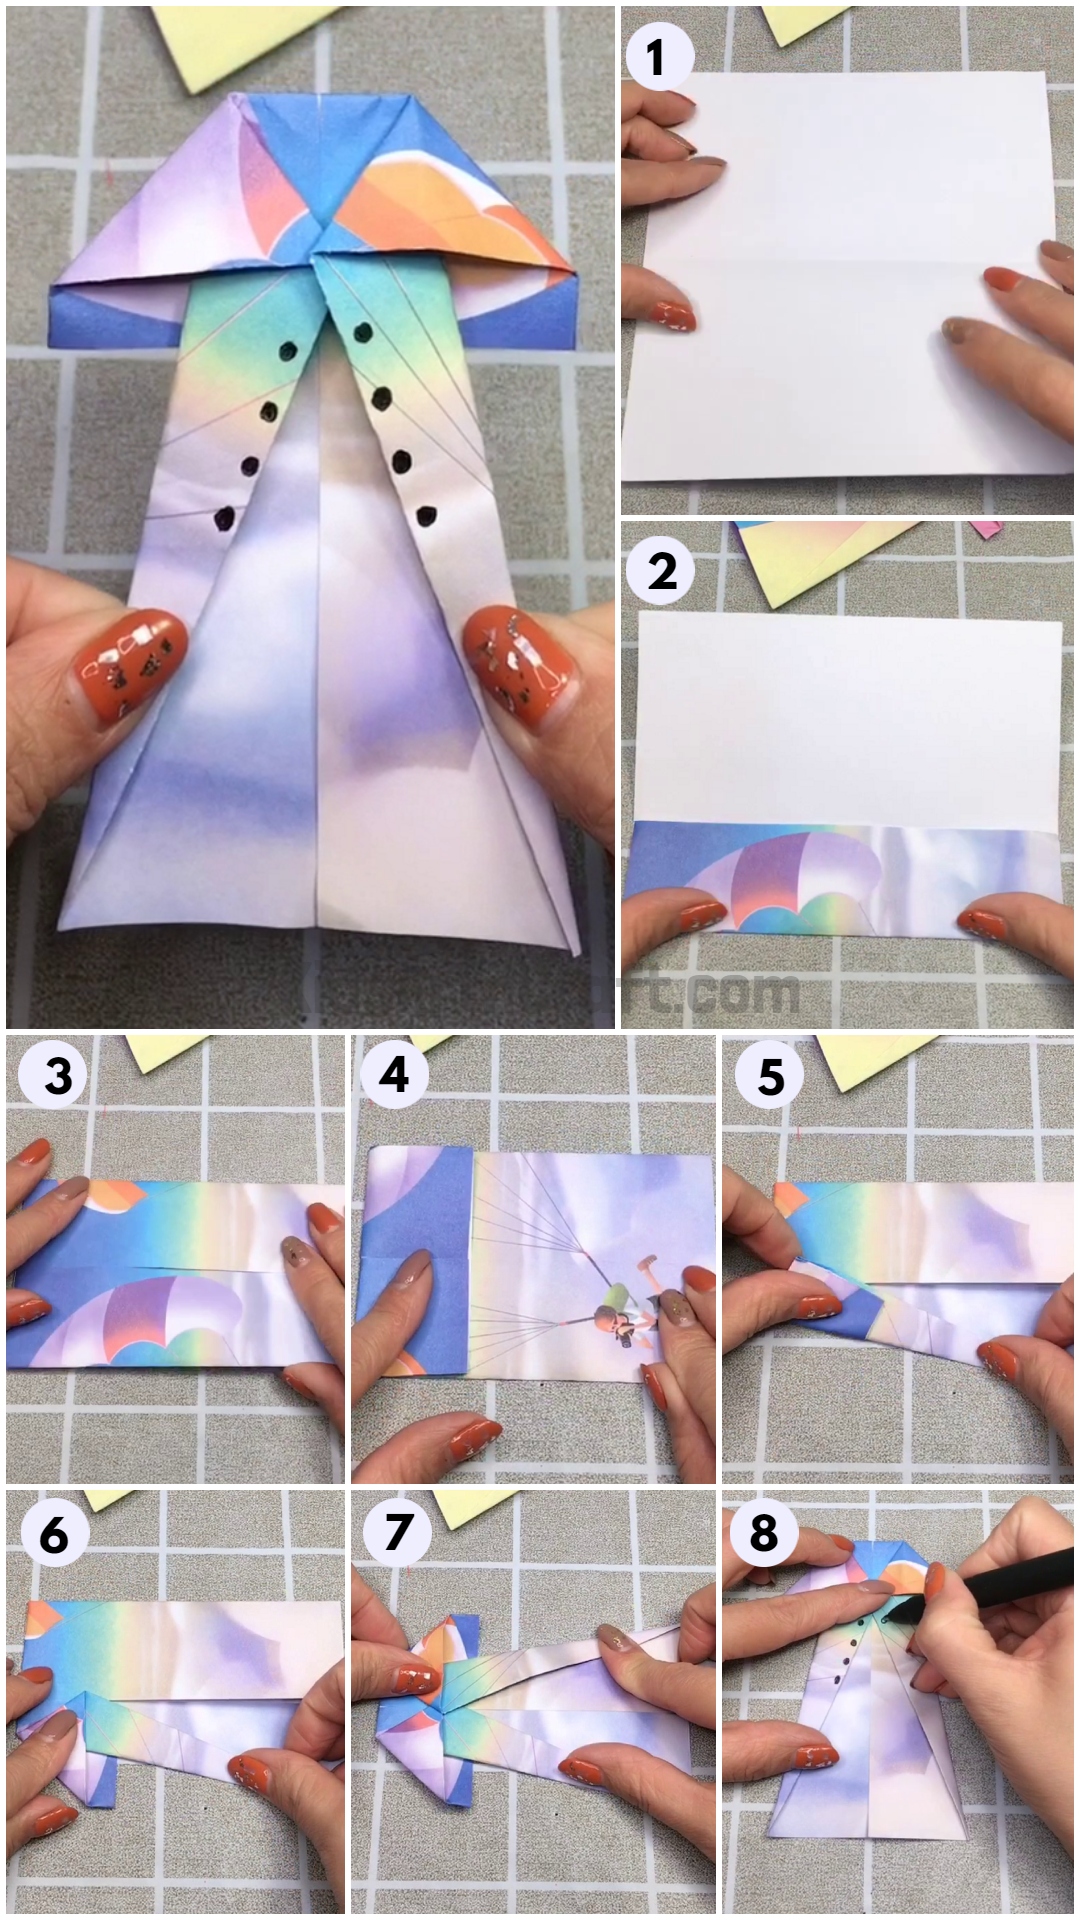 Easy Origami Paper Dress Craft - Step By Step Tutorial